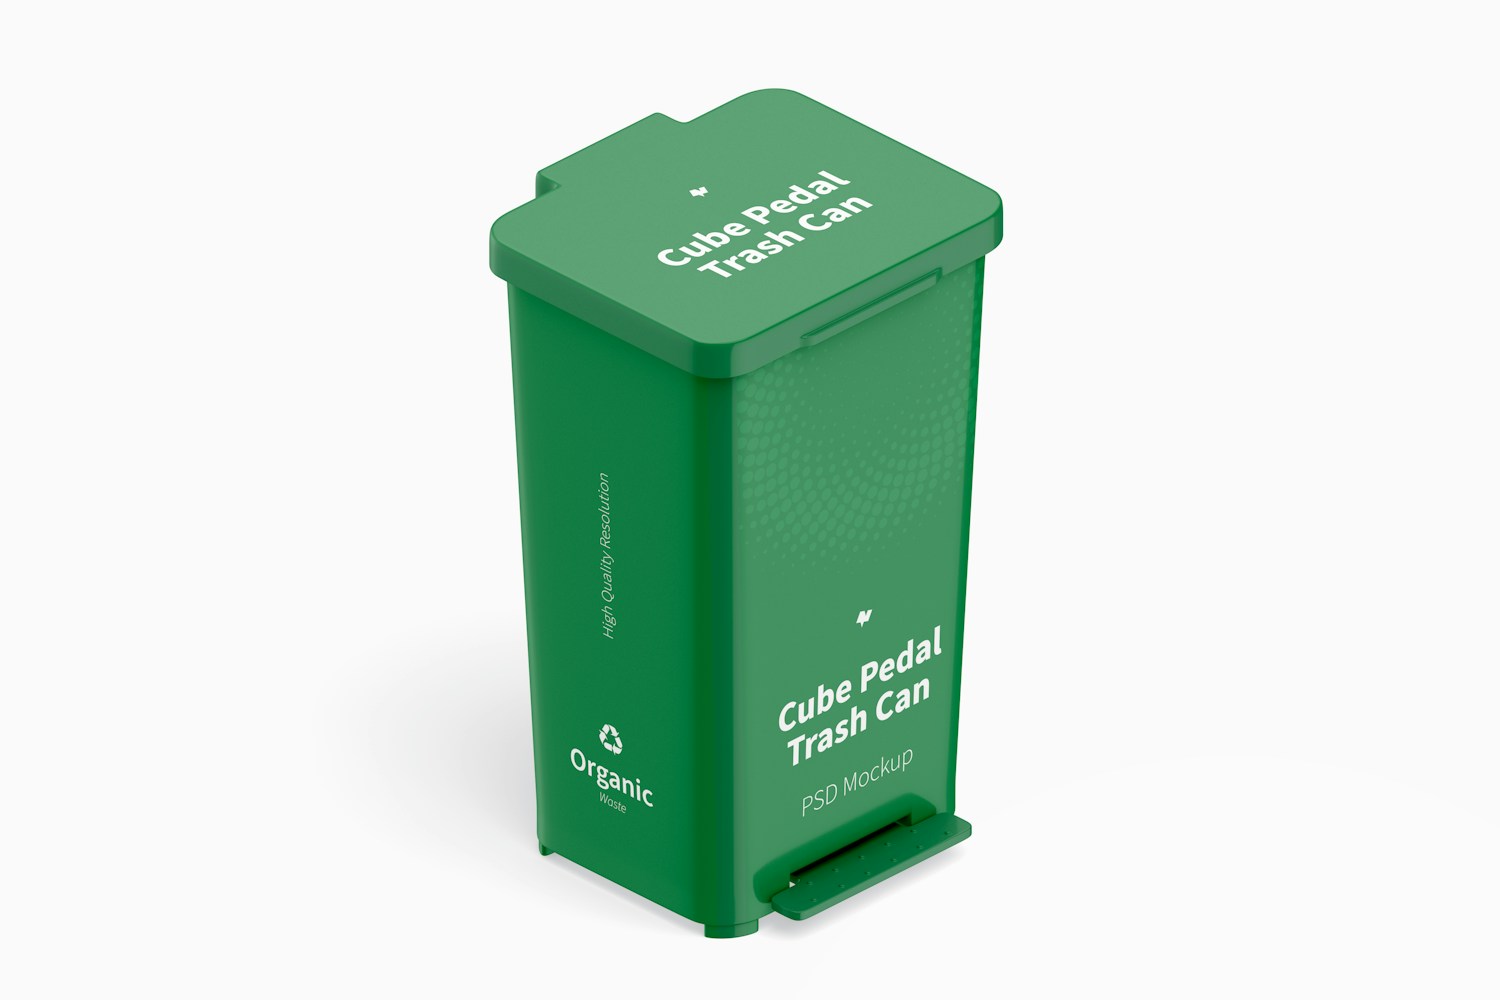 Cube Pedal Trash Can Mockup, Isometric Left View